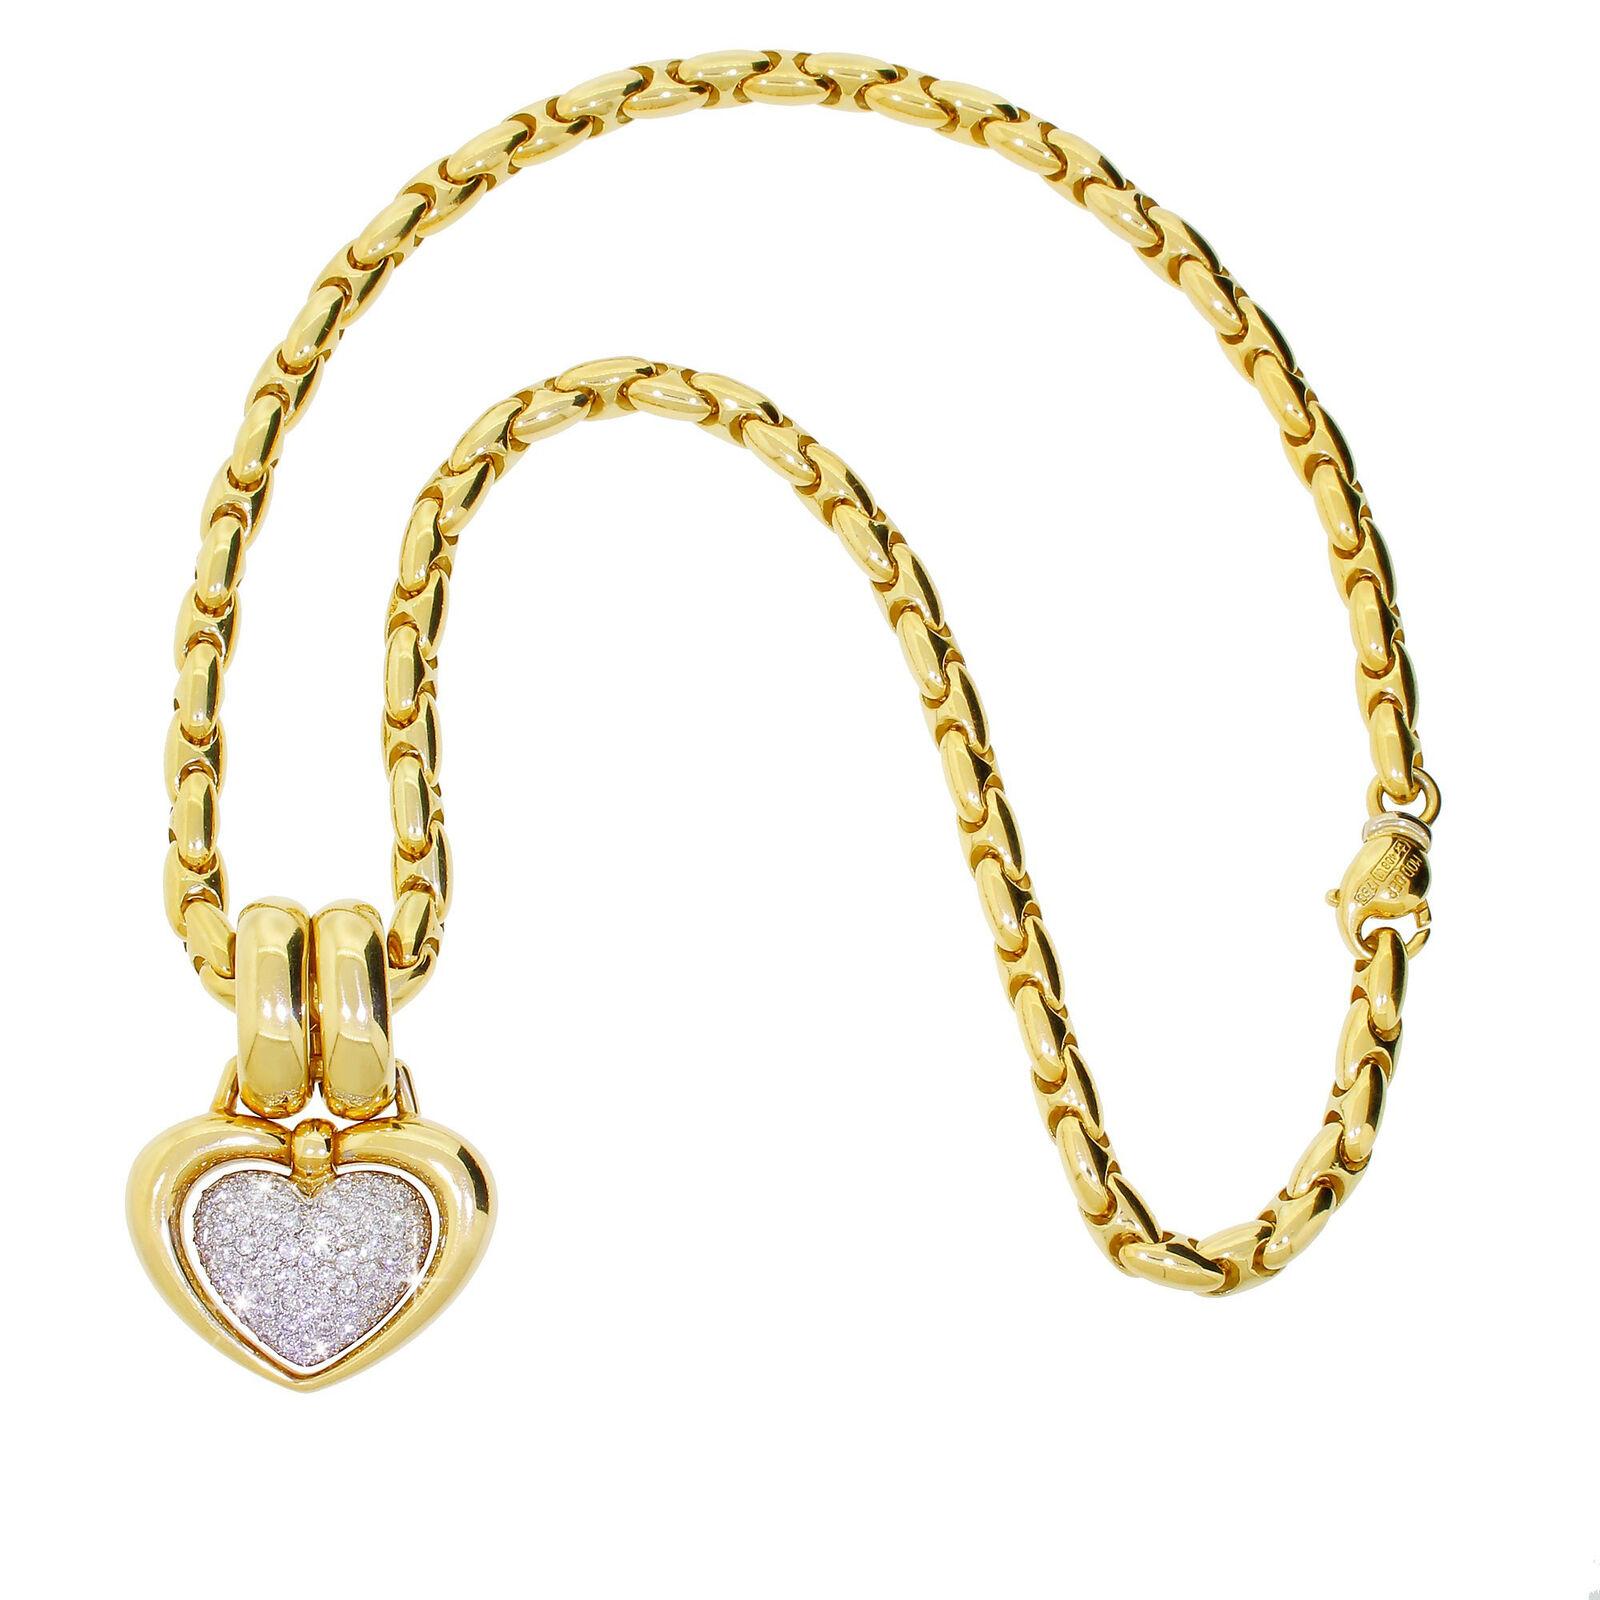 From Chimento of Vicenza, Italy we are proud to present a stunning 18k yellow gold high style pave' diamond heart pendant with matching necklace.
Chimento jewelry is world renowned for their purity, quality and elegance - and they have frequently